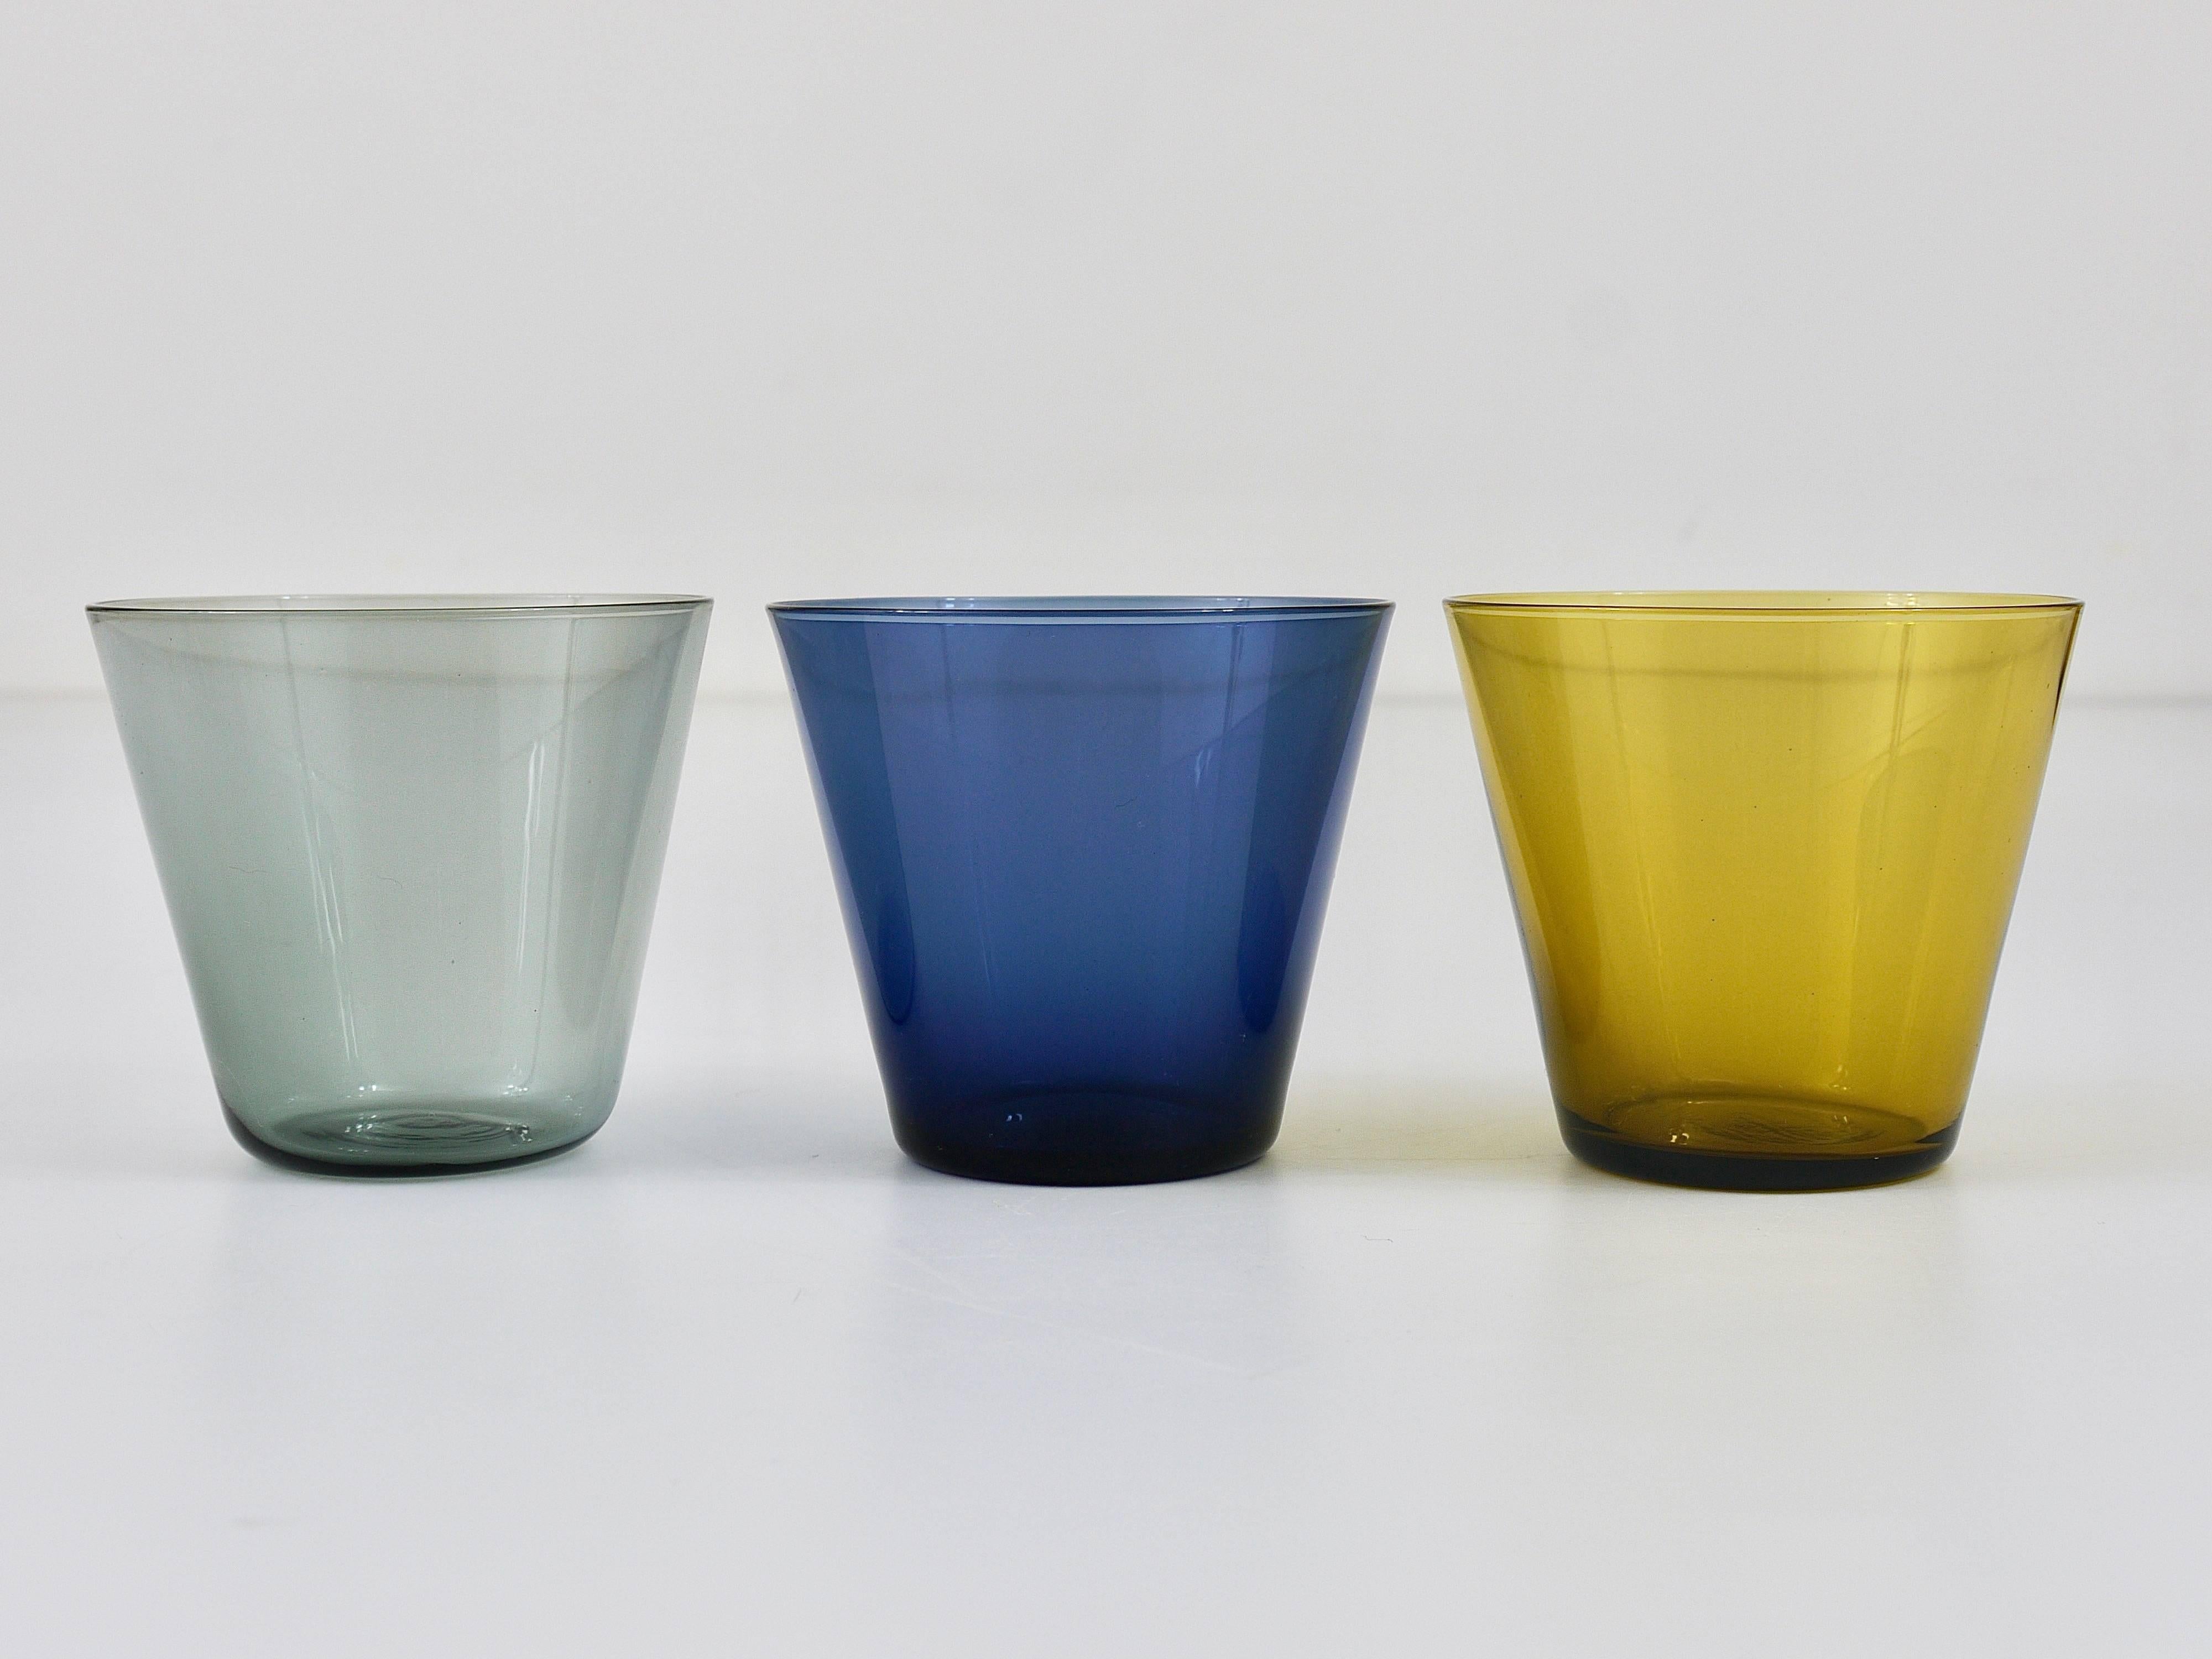 A set of six beautiful Kartio drinking glasses in grey, blue and amber from the 1950s. Designed by Kaj Franck, executed by Nuutajarvi Nottsjo Finland. In excellent condition.